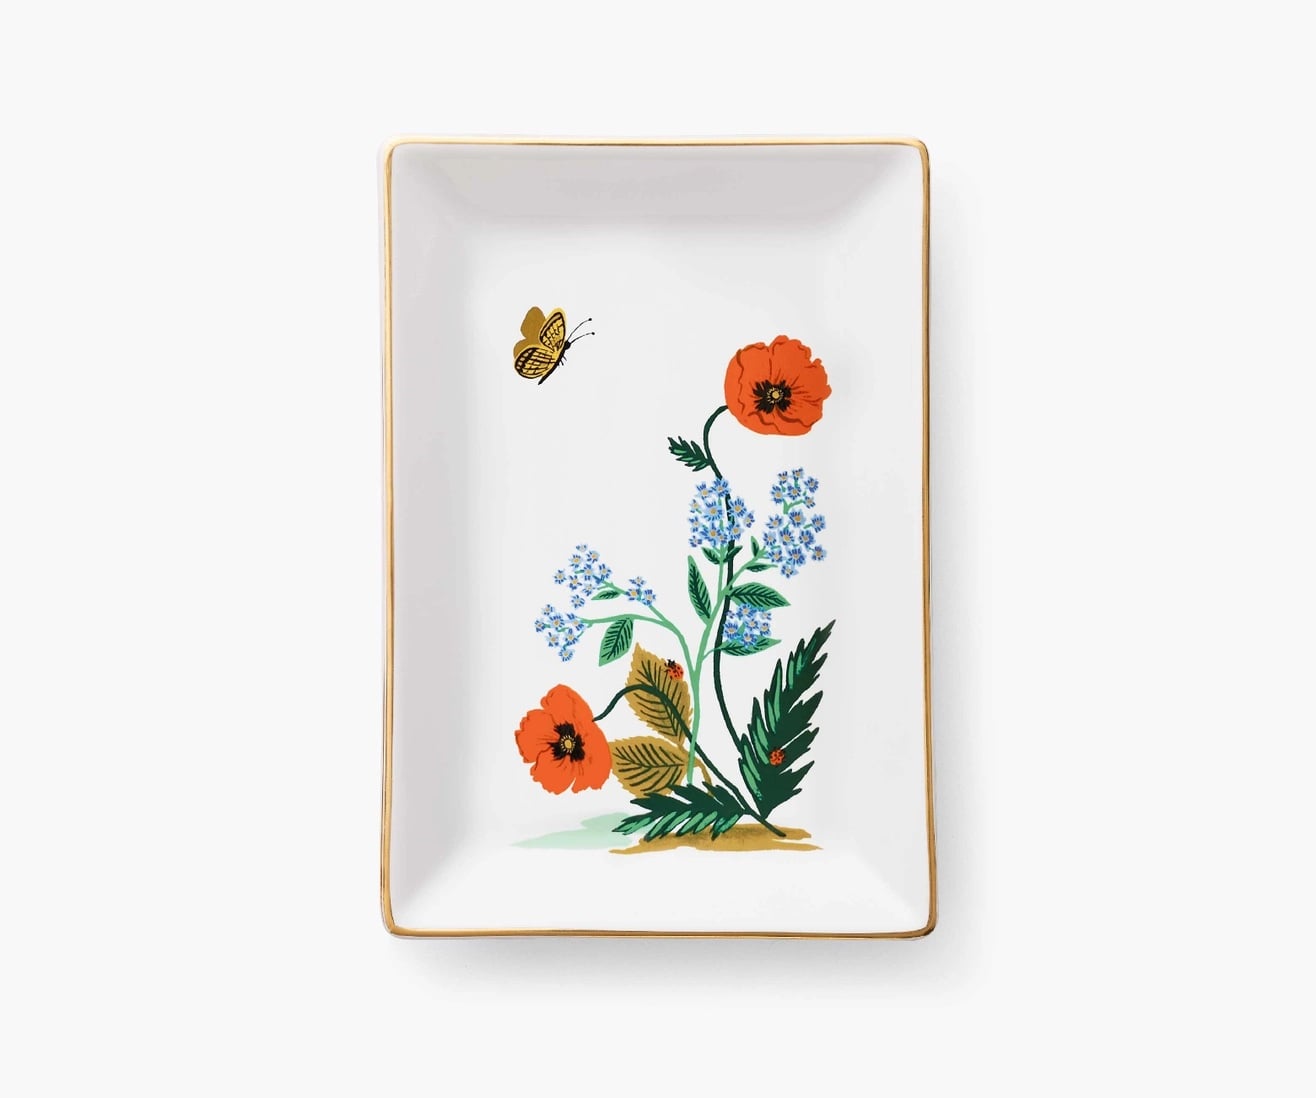  RIFLE PAPER CO. Blossom Ring Dish, Protect Your Trinkets and  Jewelry, Minimize Loss, Organize Desk, Small Item Security, Keep Valuables  Safe and Visible, Cute and Fashionable : Home & Kitchen